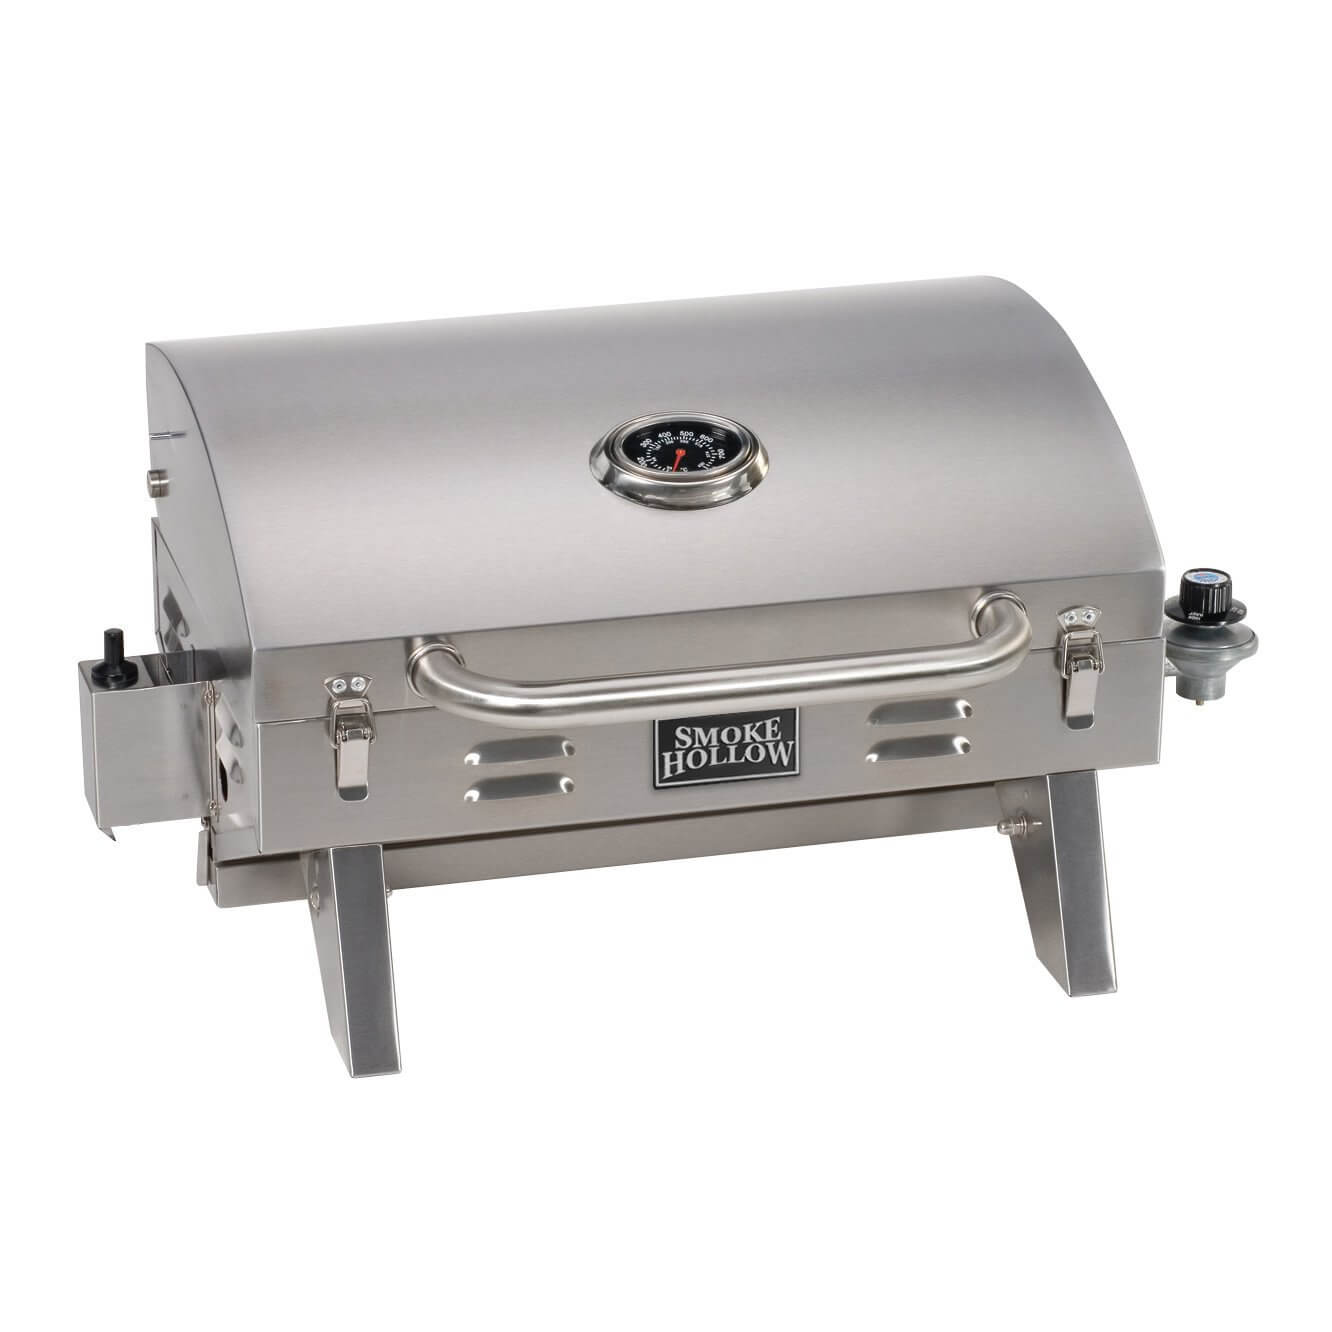 Smoke Hollow 205 Stainless Steel Portable Grill